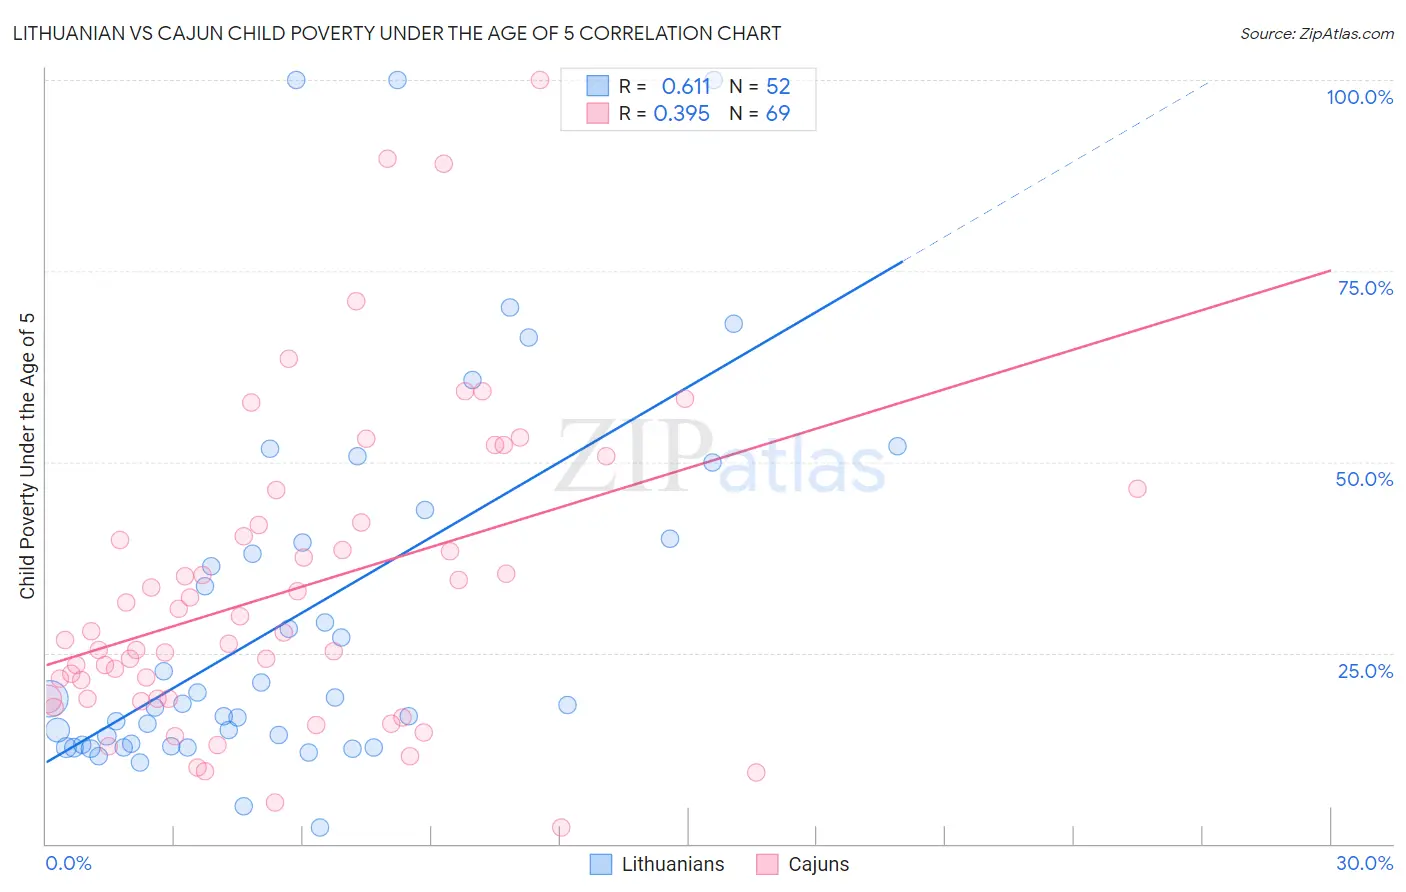 Lithuanian vs Cajun Child Poverty Under the Age of 5